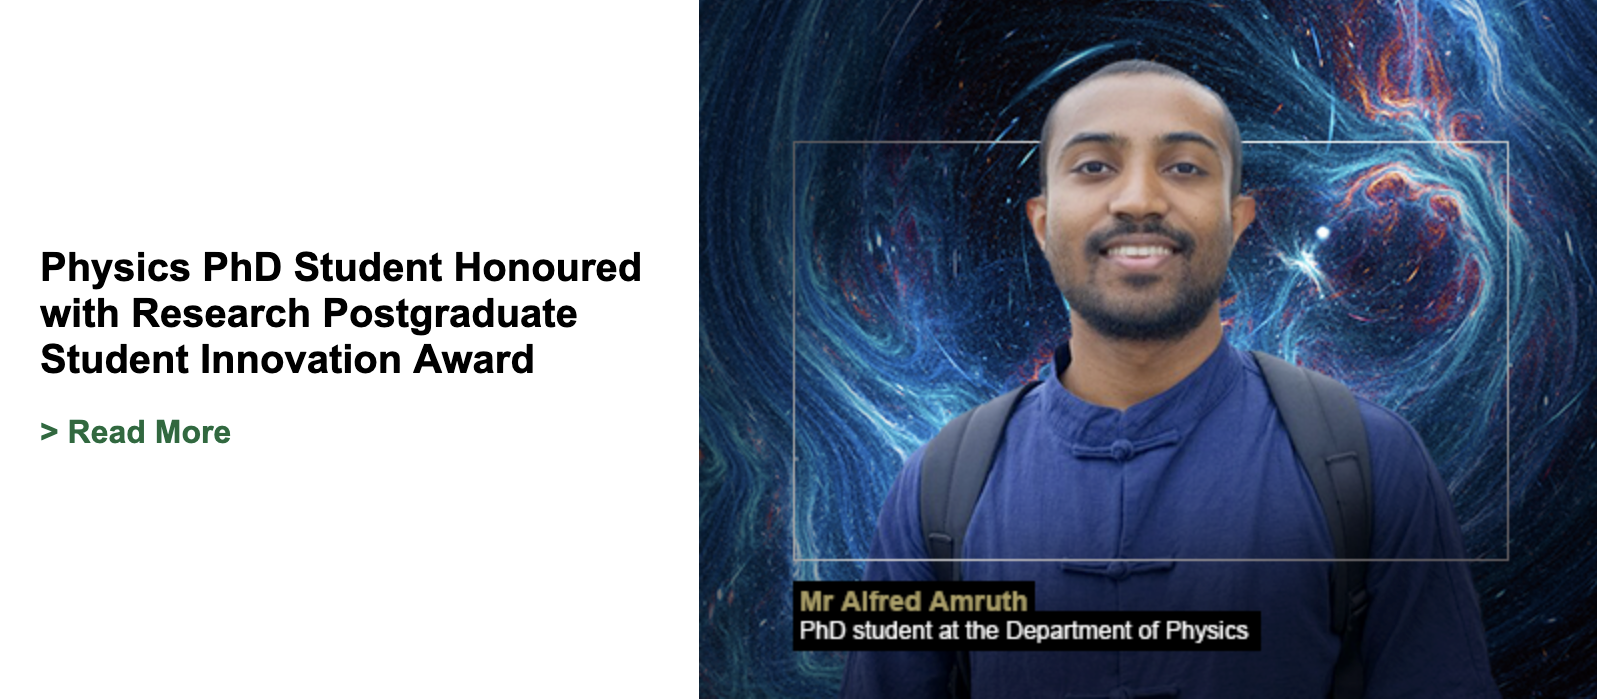 Physics PhD Student Honoured with Research Postgraduate Student Innovation Award